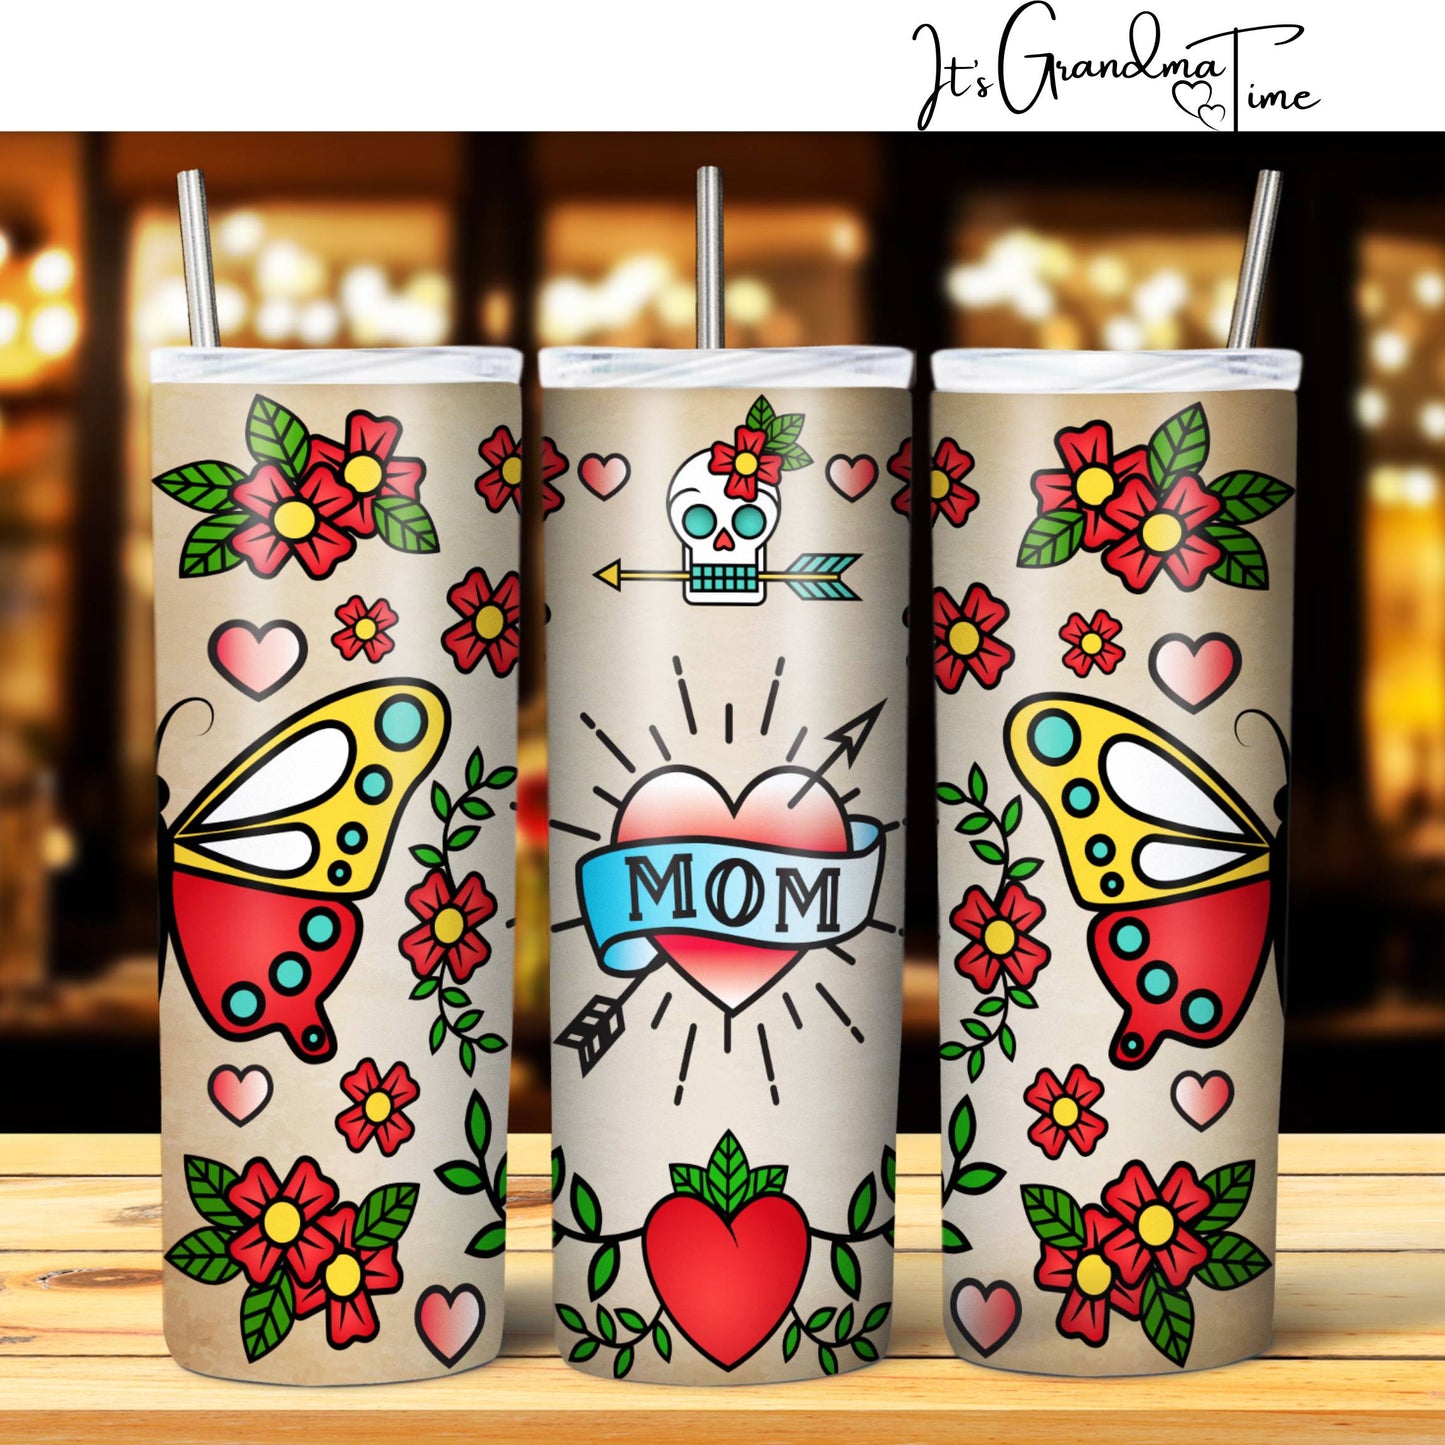 SUB1996 Vintage Mom Tattoo Mom Heart Butterfly Wings Tumbler Sublimation Transfer